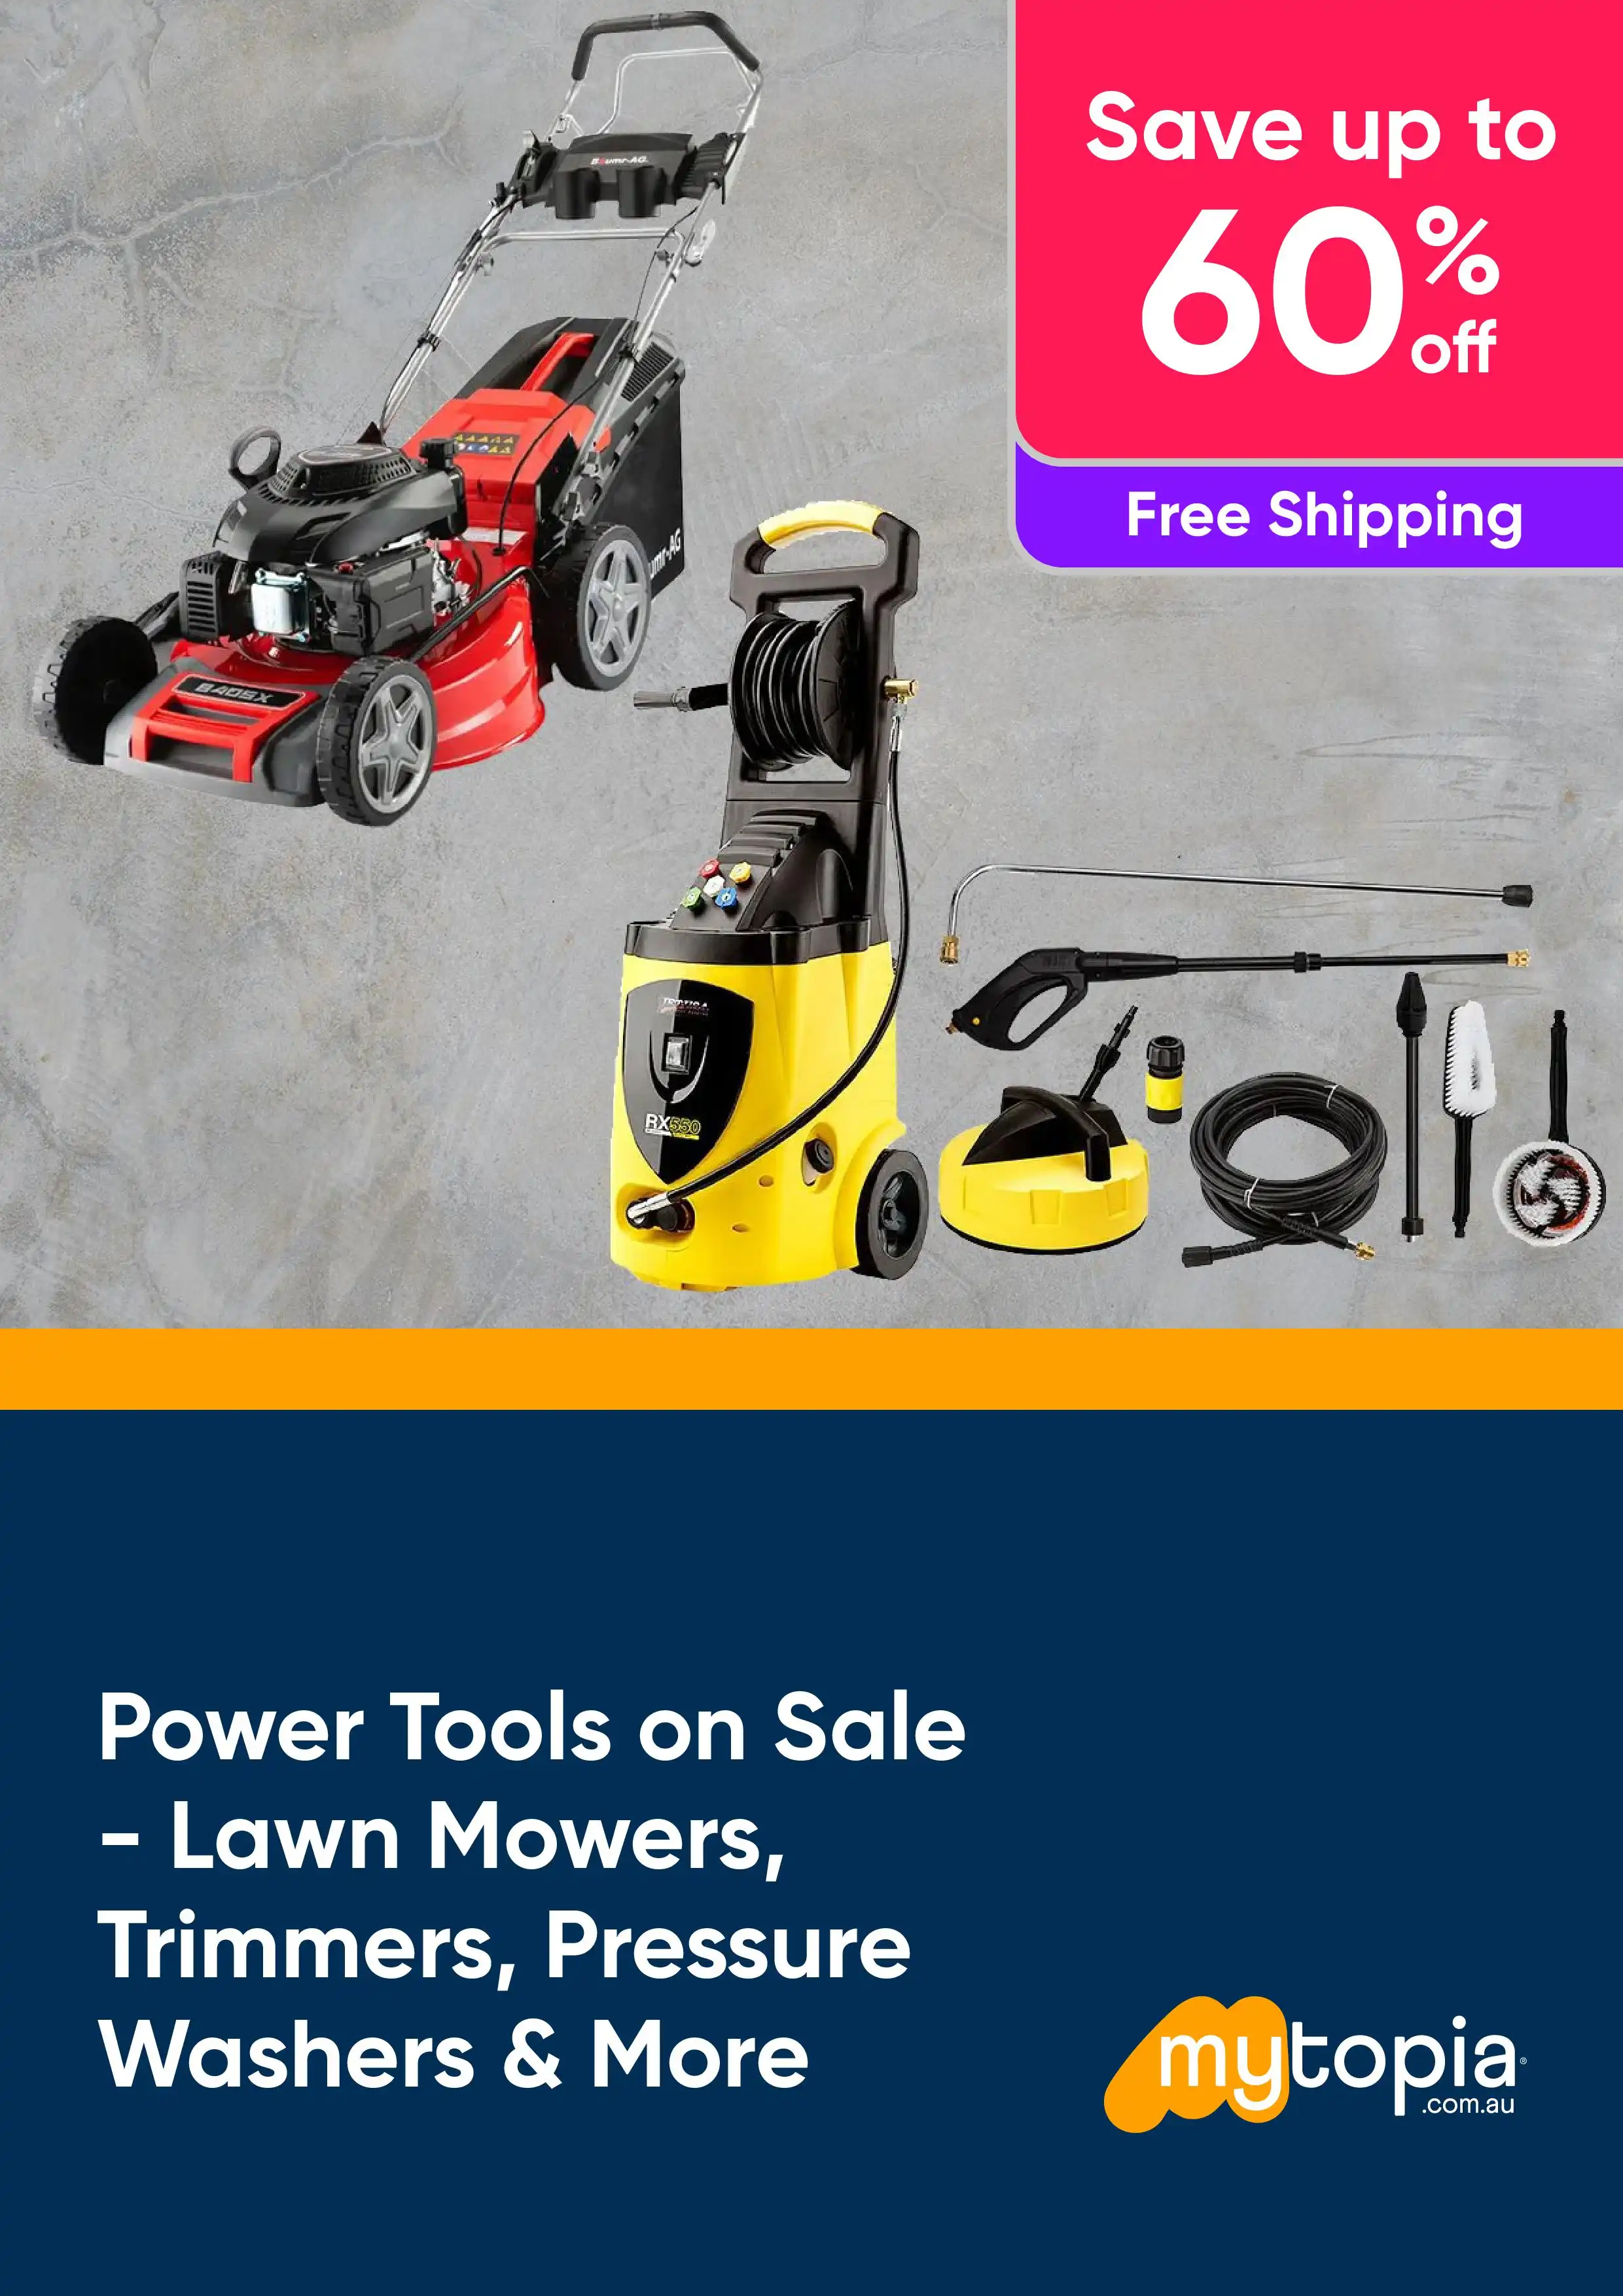 Power Tools on Sale - Lawn Mowers, Trimmers, Pressure Washers and More - Save Up to 60% Off